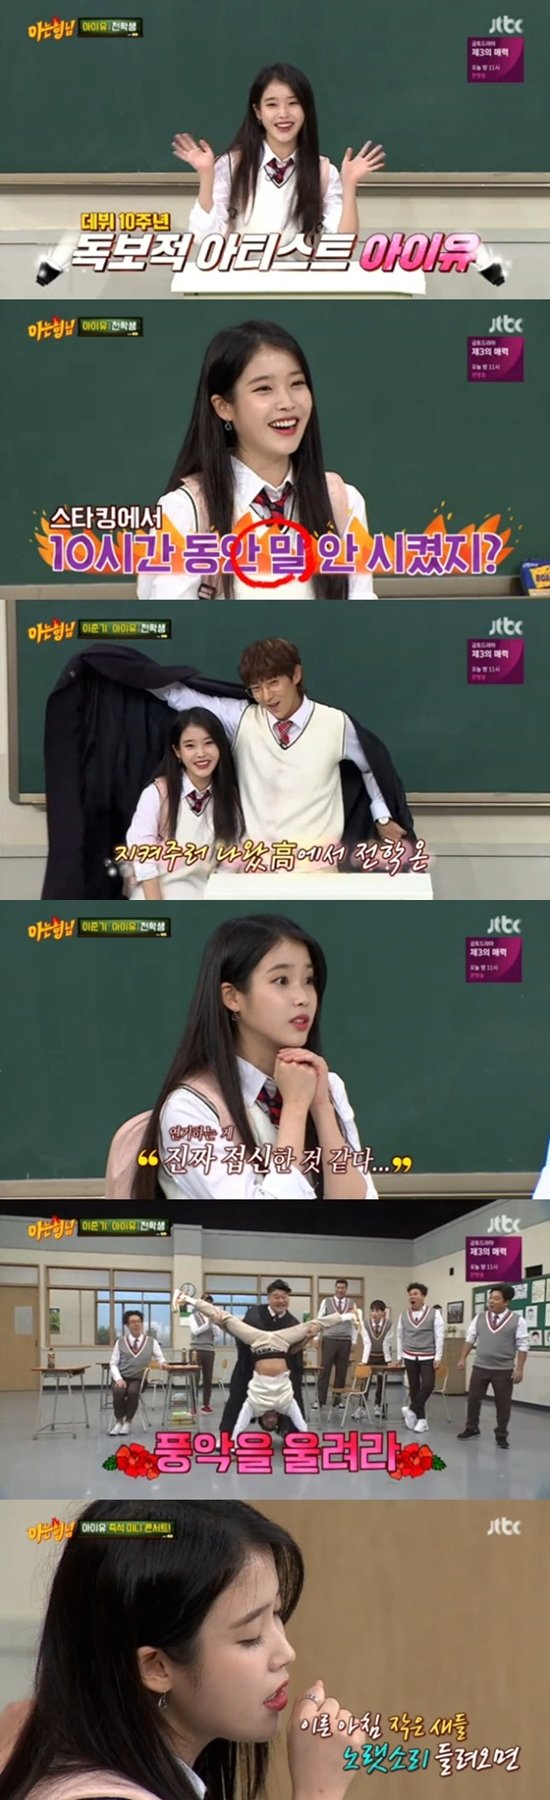 IU and Lee Joon-gi appeared on JTBC Knowing Bros on the 20th and boasted their duties.On this day, IU introduced myself, I am an IU who has transferred from here because I want to play with you guys on such a good day.In the appearance of the IU, Kang Ho-dong is very pleased and says, I originally knew it would be good, but there is a reason for real long run.Basically, people have a righteousness and keep their promises. IU, who happened to meet at the Chinese airport, said that he was seeing Men on a Mission by greeting first. Kang Ho-dong said, I promised to appear in Men on a Mission with silent eyes at that time.The IU then confessed to being a stocking victim, embarrassing Kang Ho-dong, who recalled her time in stockings in the past, saying: I was a complete rookie.It was the first time I did not say a word to the recording for more than 10 hours. I did not really yes.So the brothers told Kang Ho-dong, This is enough to audit the state.Kang Ho-dong then framed IU slept no matter how shaken it was, and IU goed home and wrote a diary after that broadcast.I was seventeen, and I wrote, I really should be good. From then on, I really worked hard on the broadcast and I think I was able to come here.I was good at it after a good day, he said, laughing.The entertainment program, which has been a long time, introduced Lee Joon-gi, saying that he brought his most honey jam friend. The two of them appeared together in the drama Bobo Sensei.I asked him directly by phone. I did not do a lot of entertainment, but I thought I would not do it honestly.I told him to think about it for a week, but he contacted me in two days. We had time to praise each other. Lee Joon-gi said of the IUs performance, It was really good, I thought it was really great.There was a sense of directorship as I analyzed and observed the situation back and forth, IU praised. Lee Joon-gi acts as if he really did.Crying is not just crying, but laughing and crying, and I do not think I will cry. Suddenly I turn around and cry.There were many gods of hardship, but I do not enter the emotion, but I do it immediately when the sign of Q goes in. Lee Joon-gi, who has a sense of entertainment burden, showed off the fun sense hidden in Kang Ho-dongs buzzword No Owl.He sang a pomegranate advertisement CM song, and also played a situational drama with Lee Soo-geun and The Kings Man. He showed off his flexible body by tearing his legs to match the modifier of action actor.The IU also caught the eye by showing yoga moves learned in Hyoris Homestay. They also sang their brothers recommended songs in turn and held mini concerts.